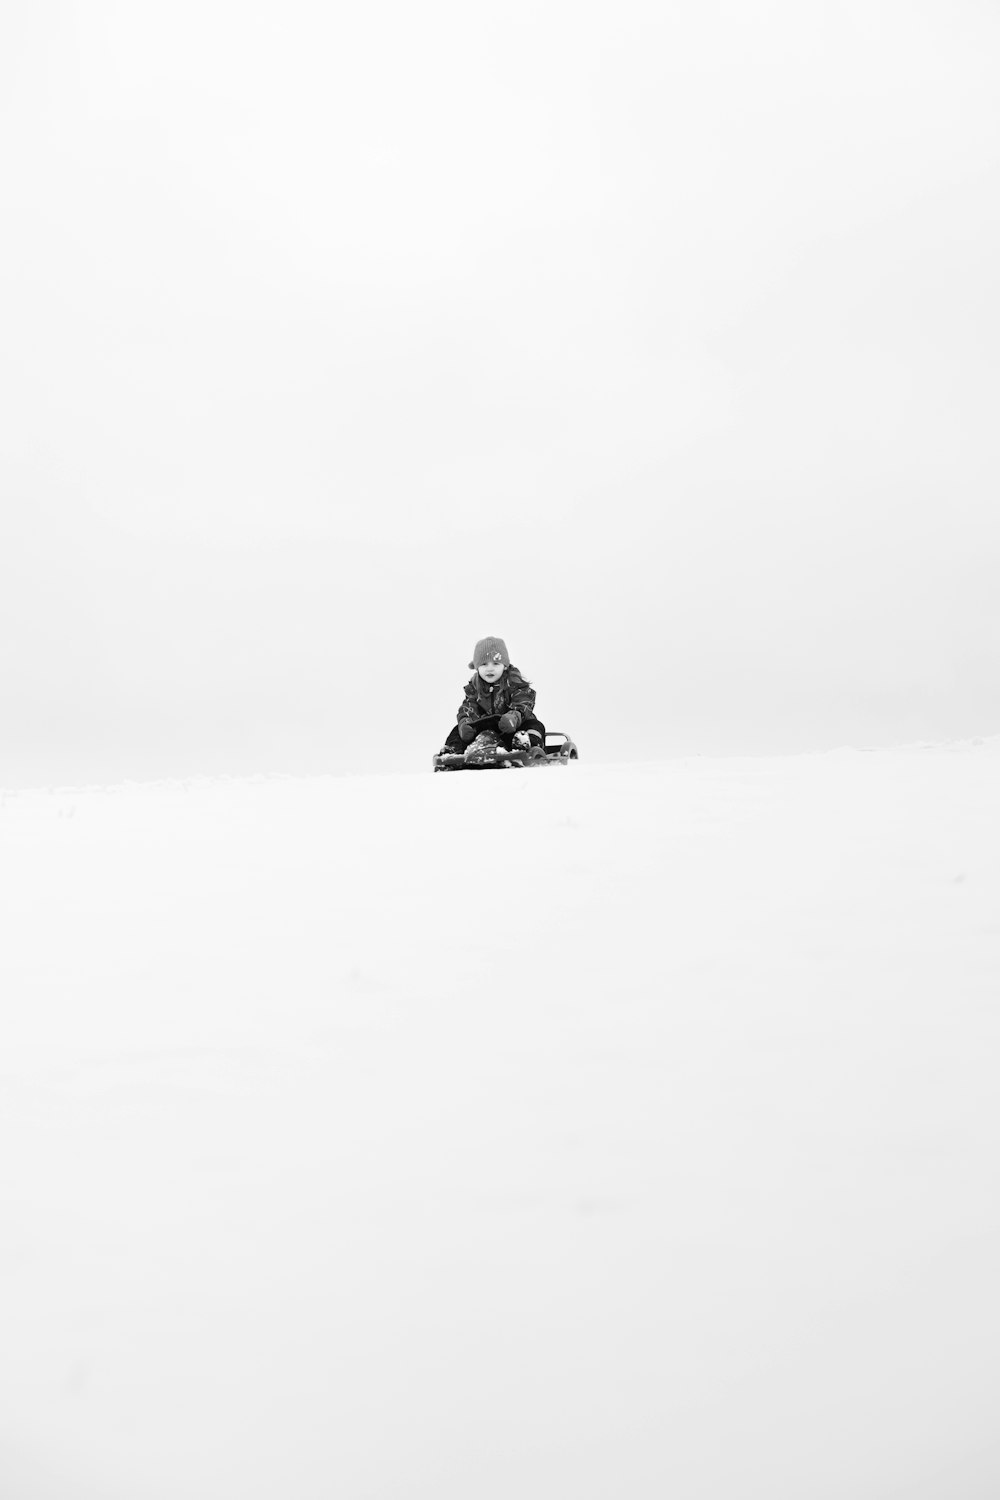 child on sled going down on snow slope